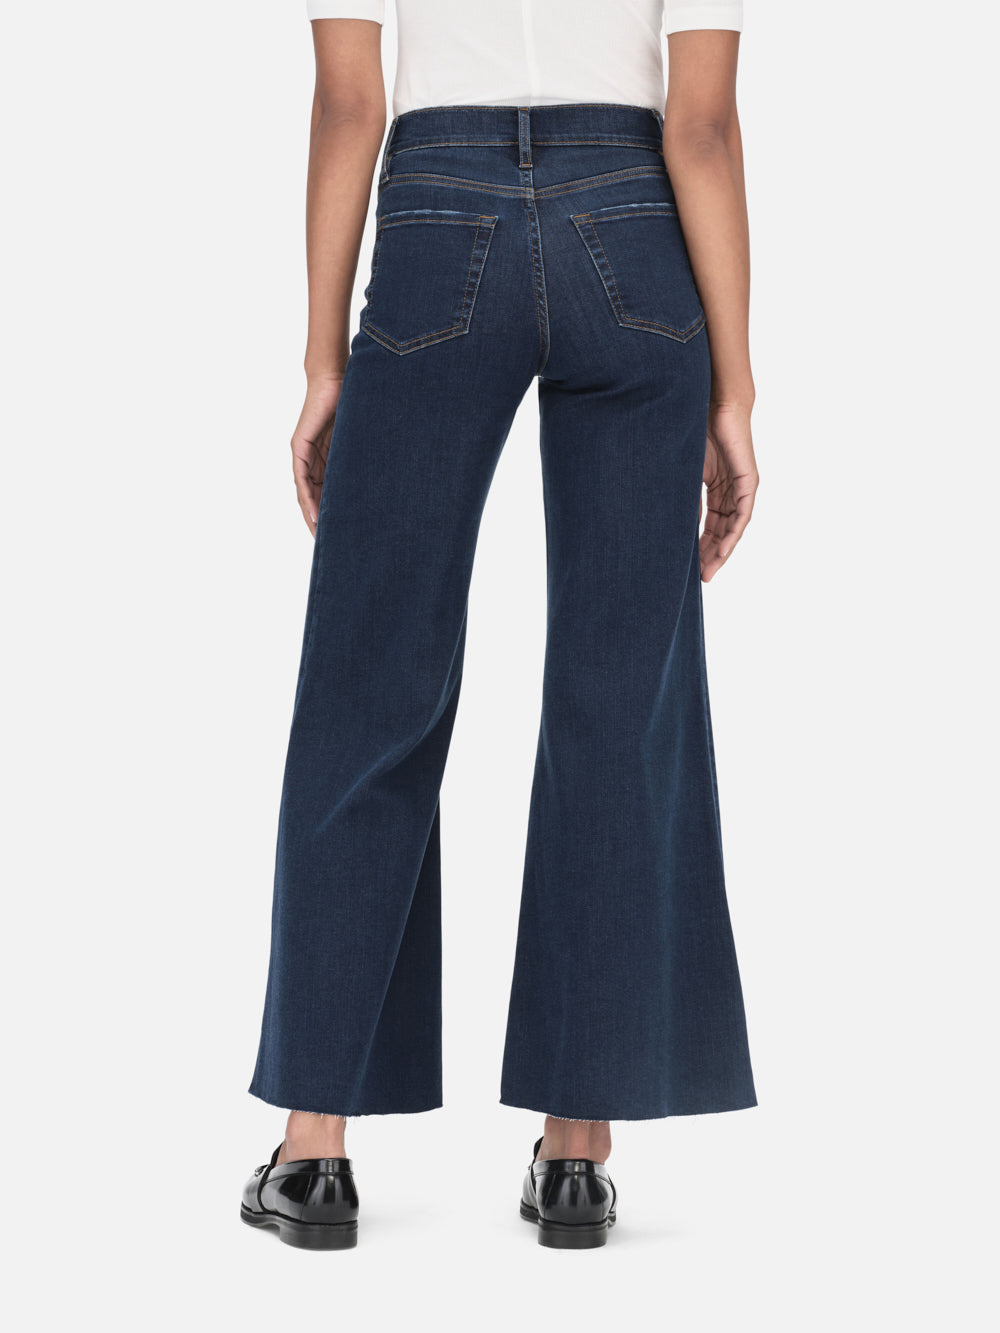 FRAME Le Palazzo Crop Jeans